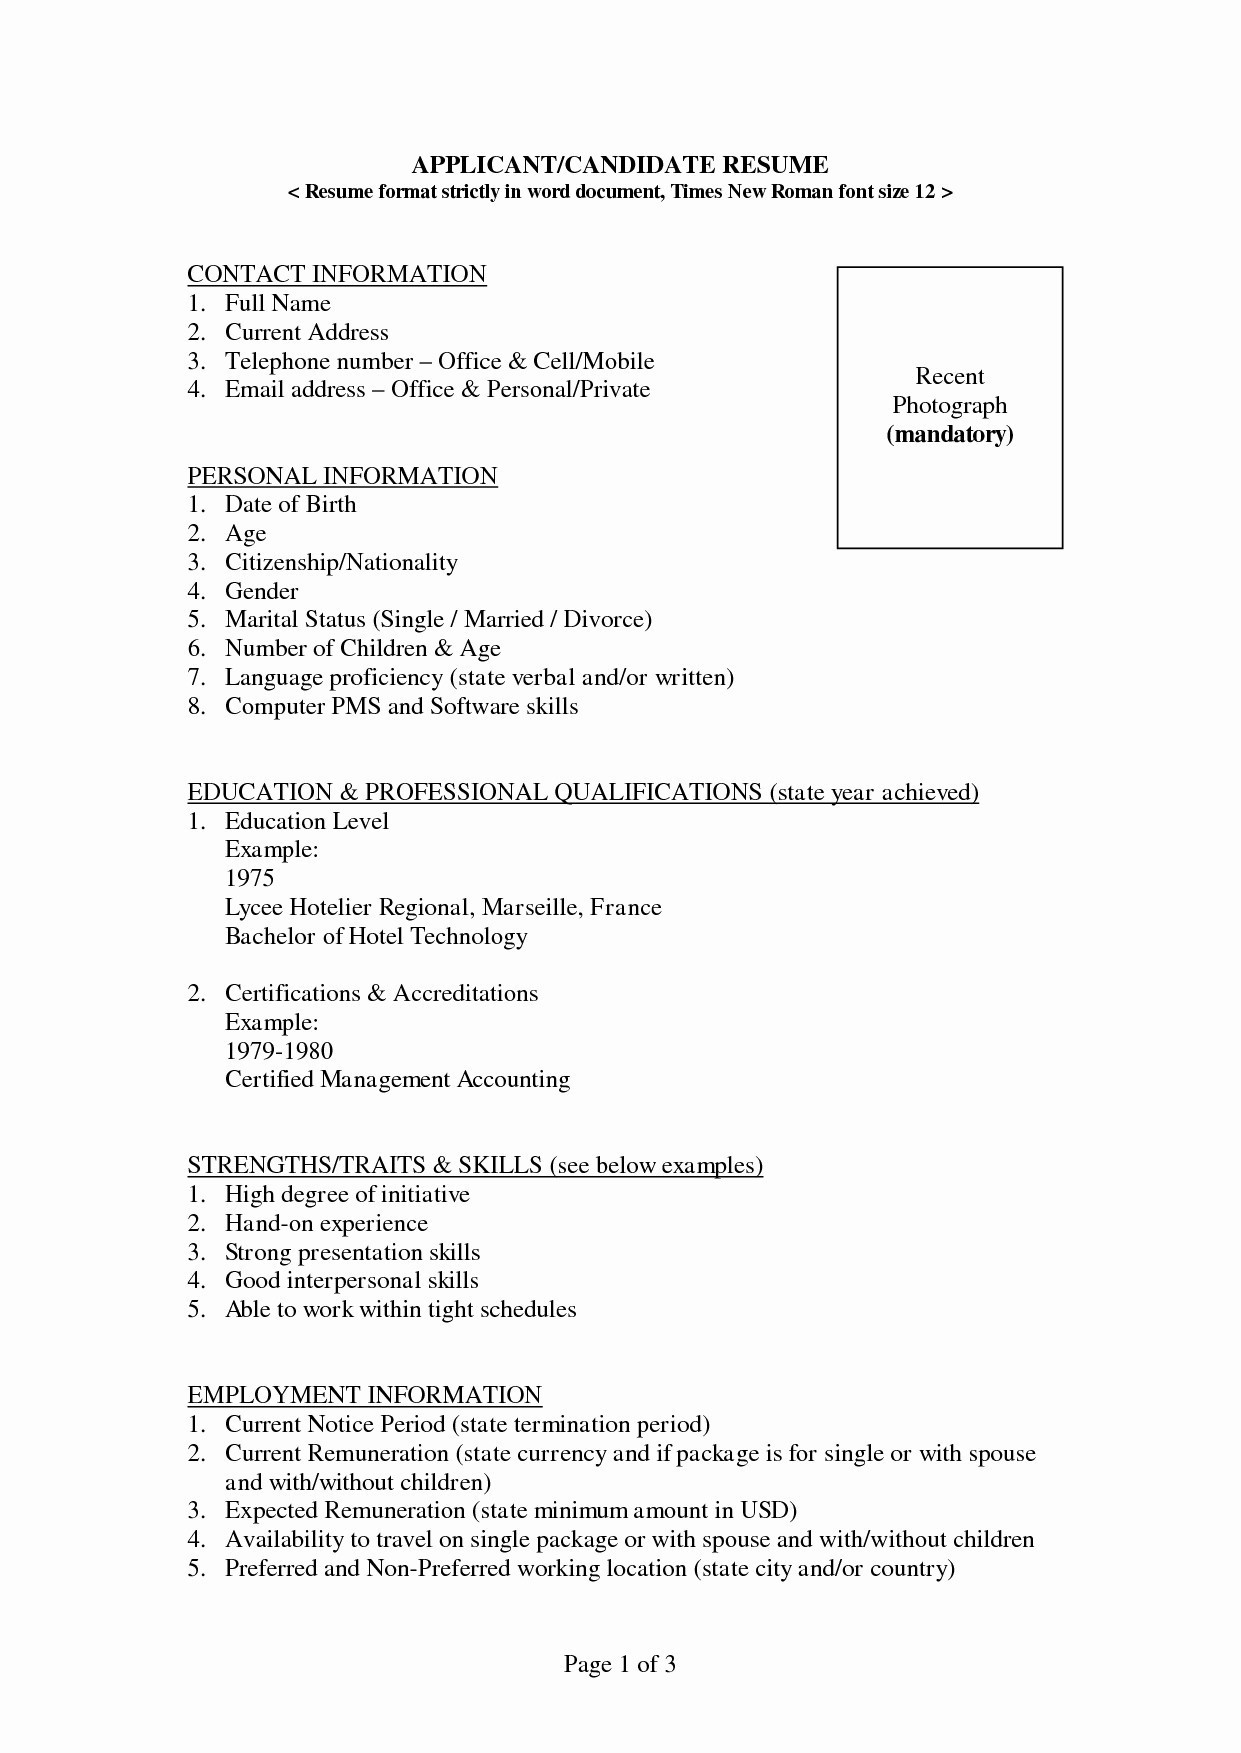 How To Type A Resume Bank Teller Sample Resume Sample How To Type Resume Lovely Inspirational Resumes For A Bank Teller Of Bank Teller Sample Resume how to type a resume|wikiresume.com